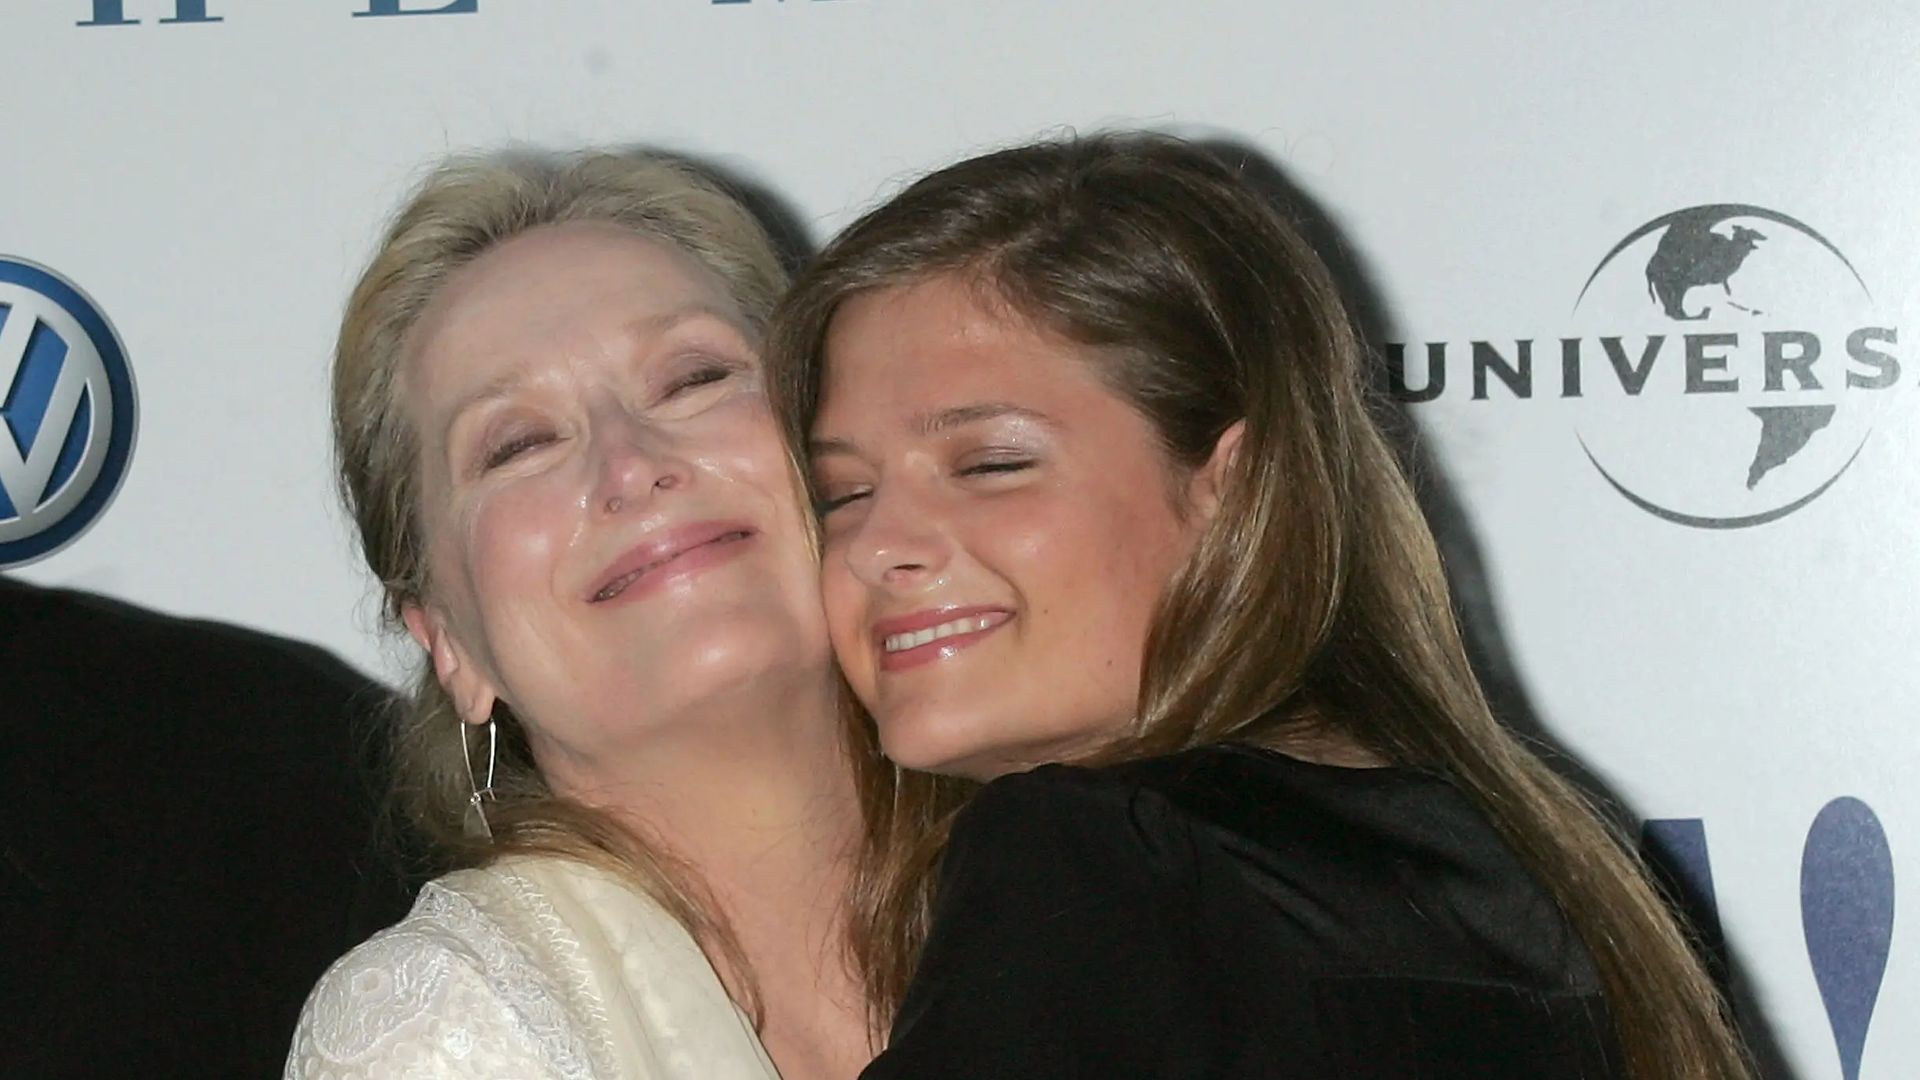 Meryl Streep’s daughter, Louisa Jacobson Gummer, comes out as lesbian with heartwarming post